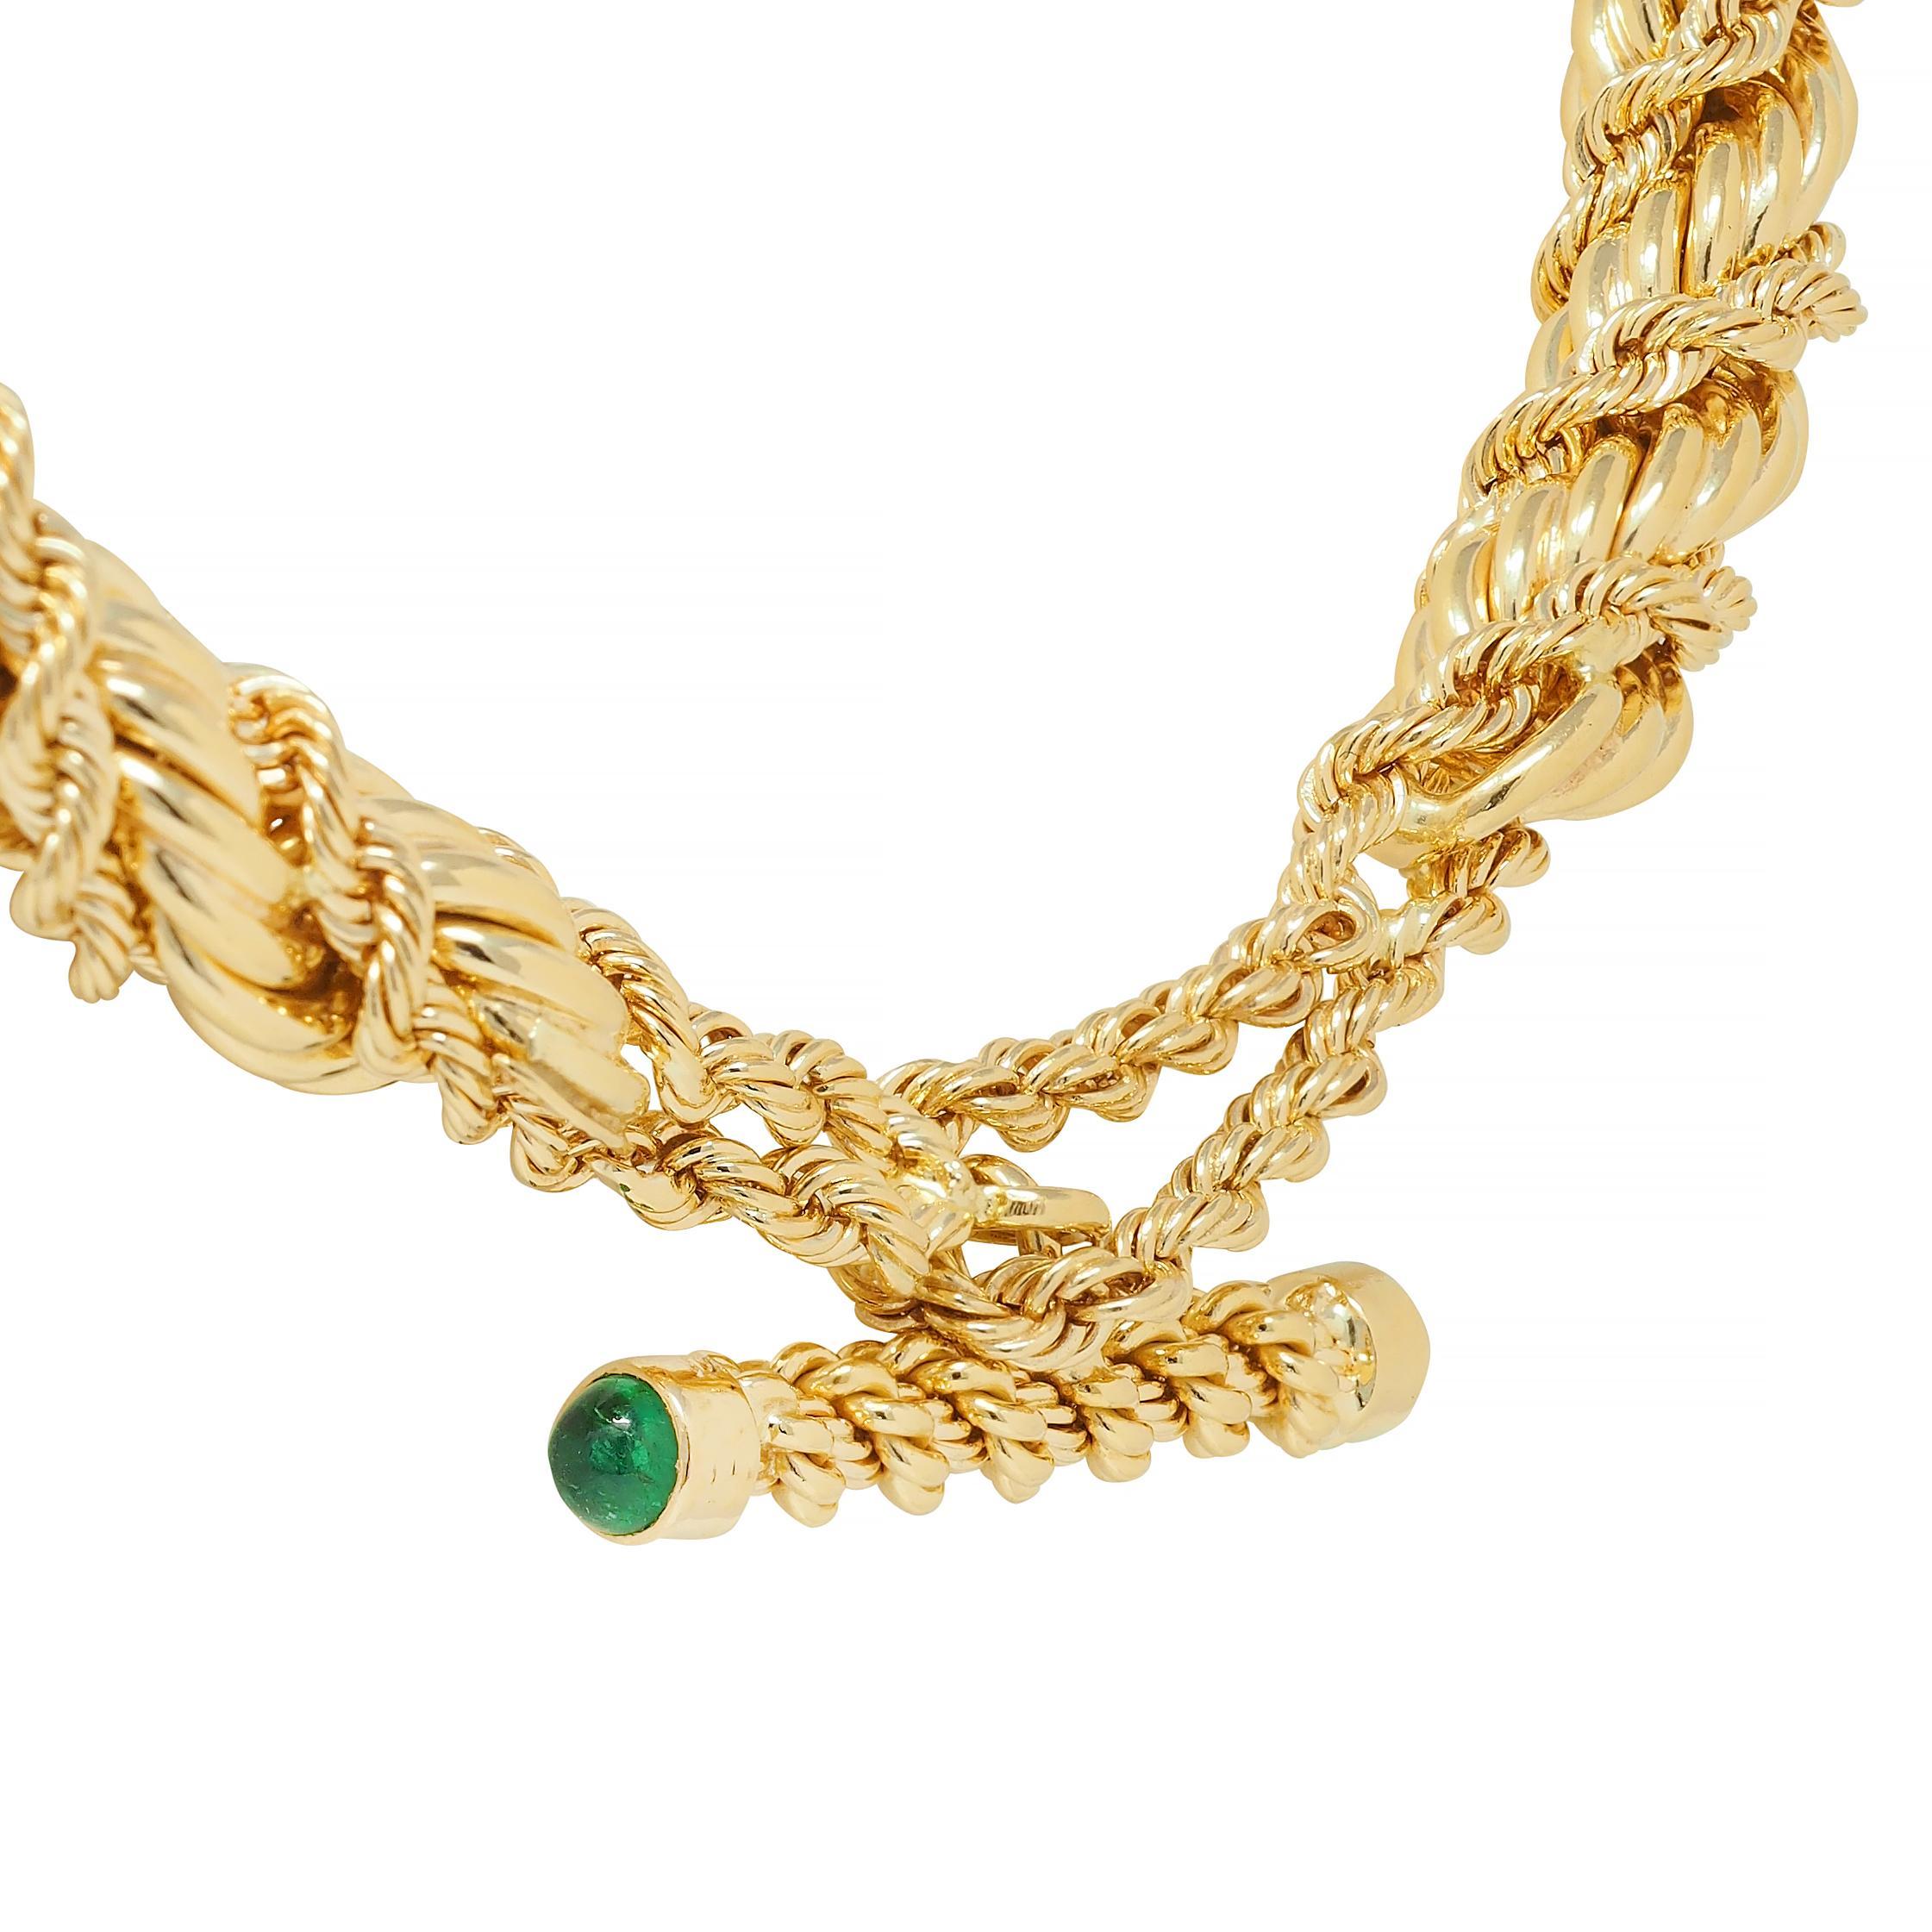 Schlumberger Tiffany & Co. Emerald 18 Karat Gold Twisted Rope Vintage Necklace For Sale 2